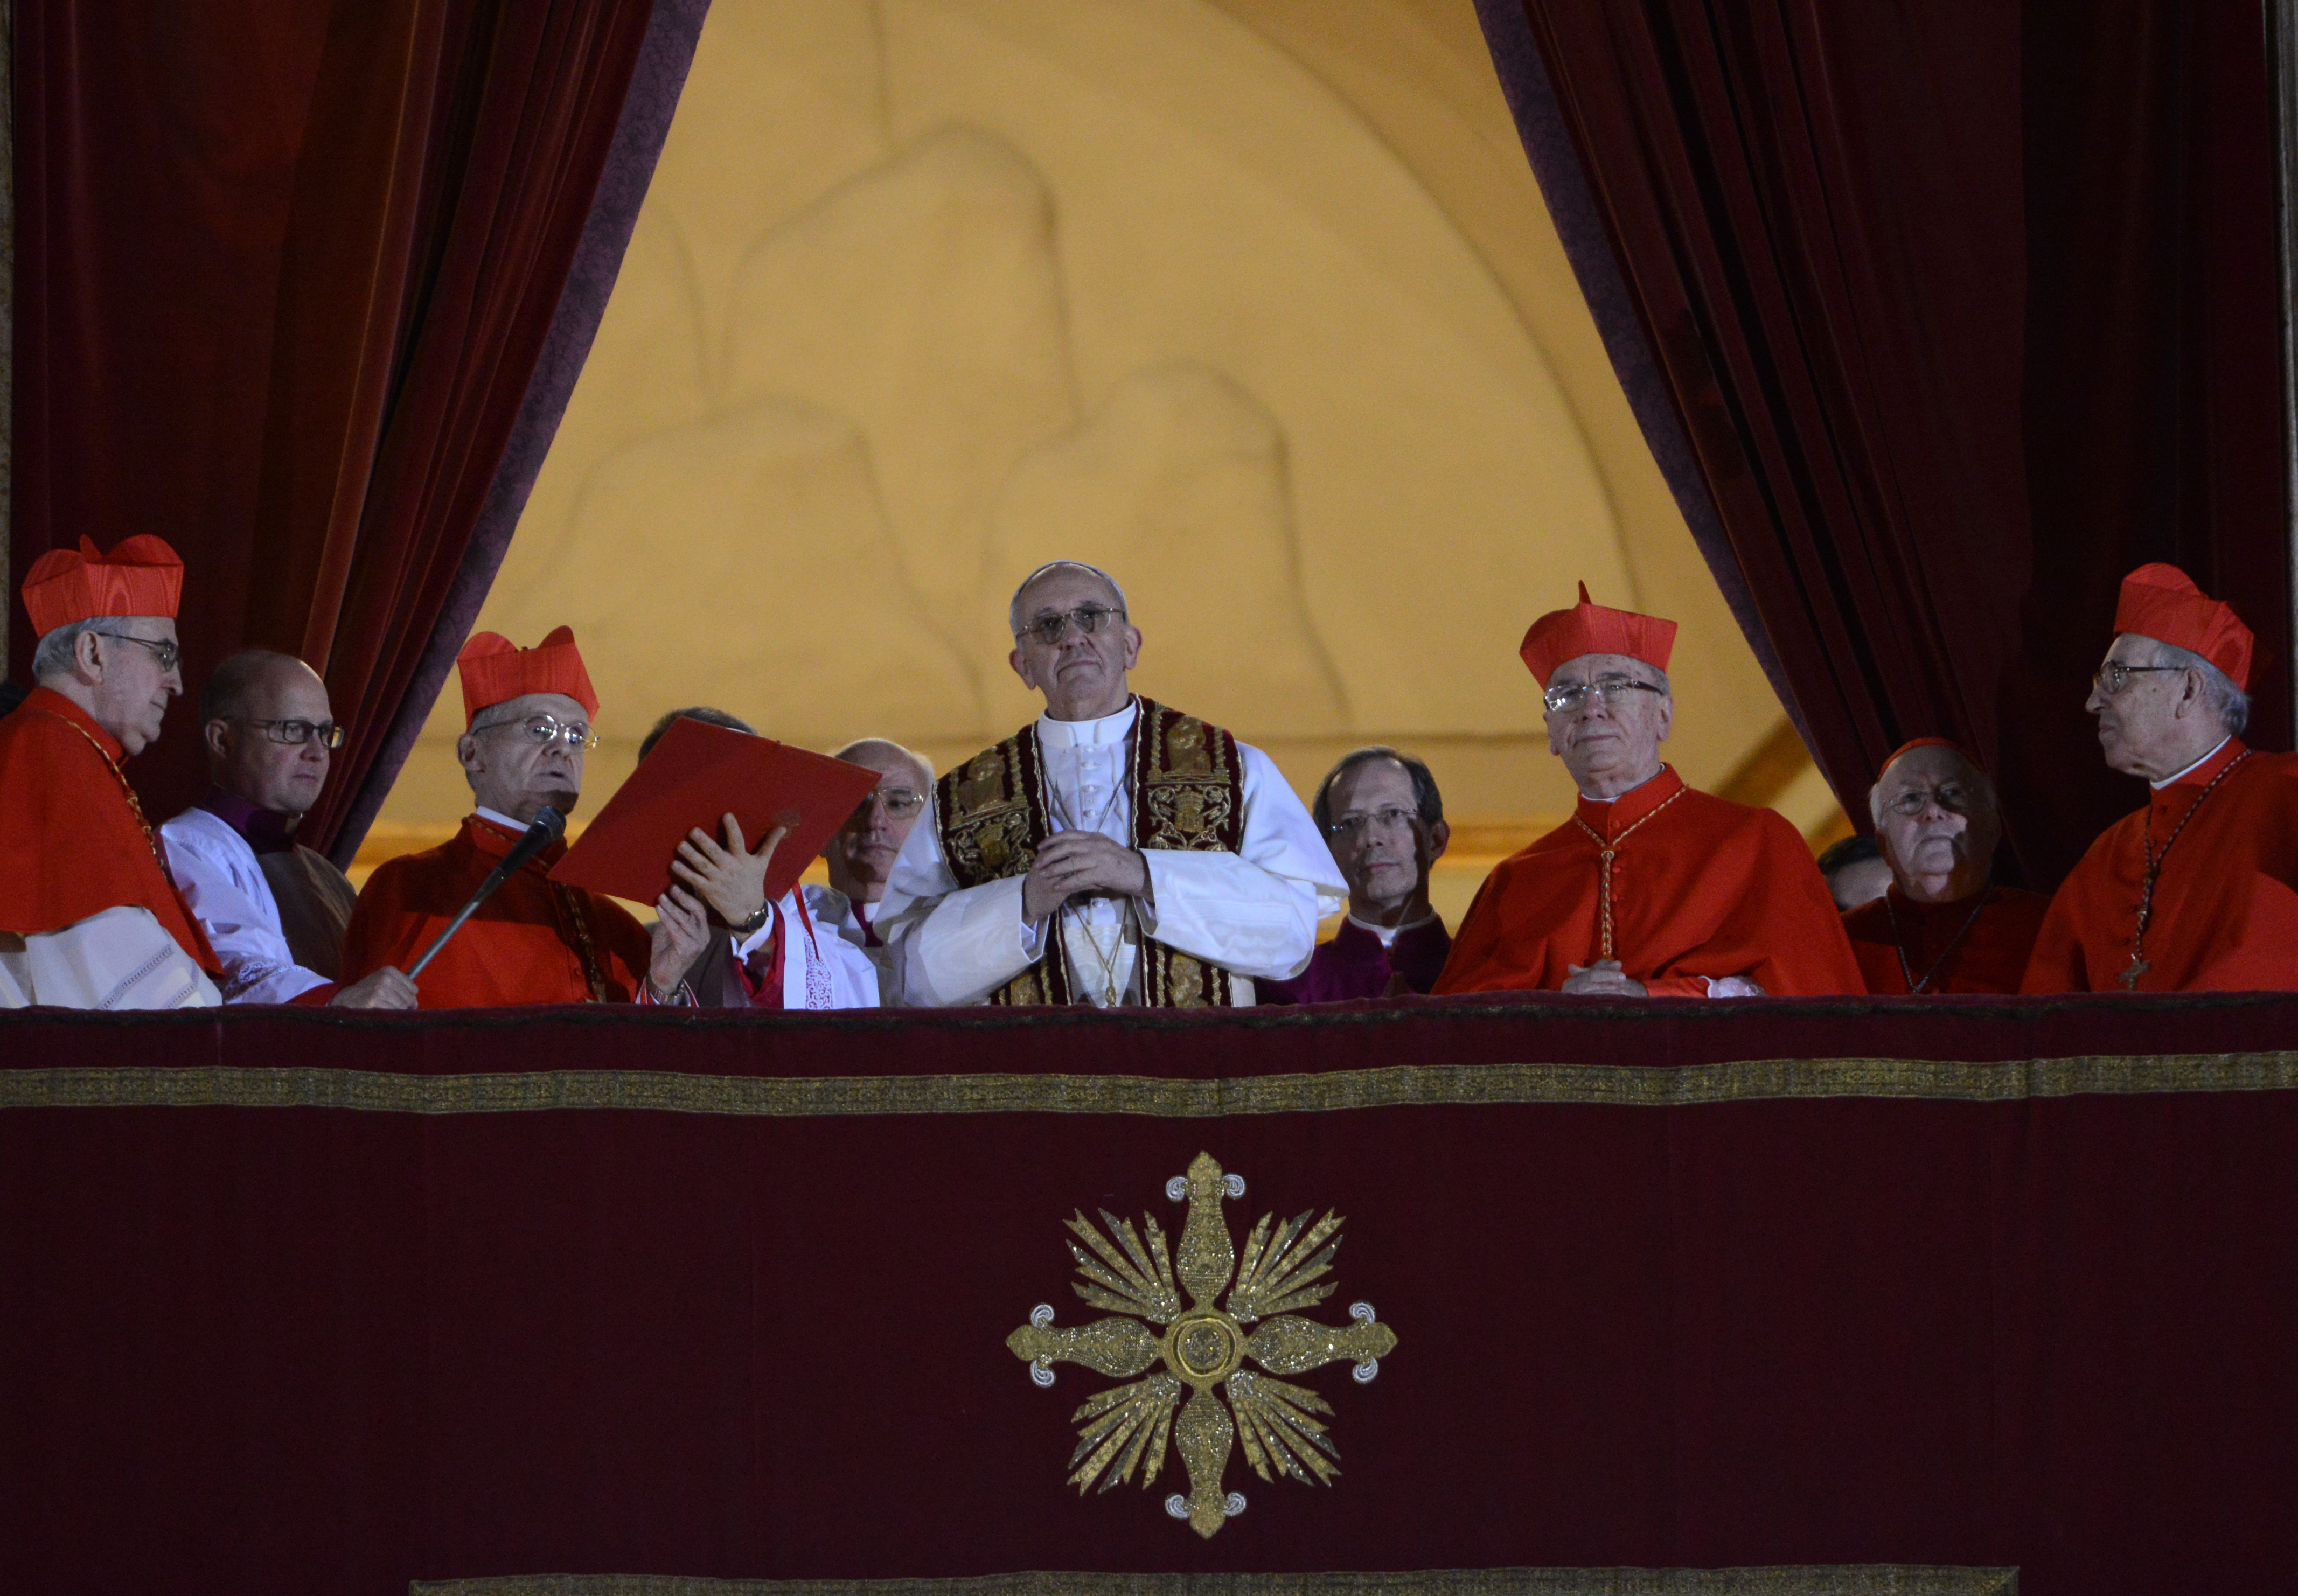 US-group plans dossiers on cardinals to prevent repeat of conclave that elected Francis  